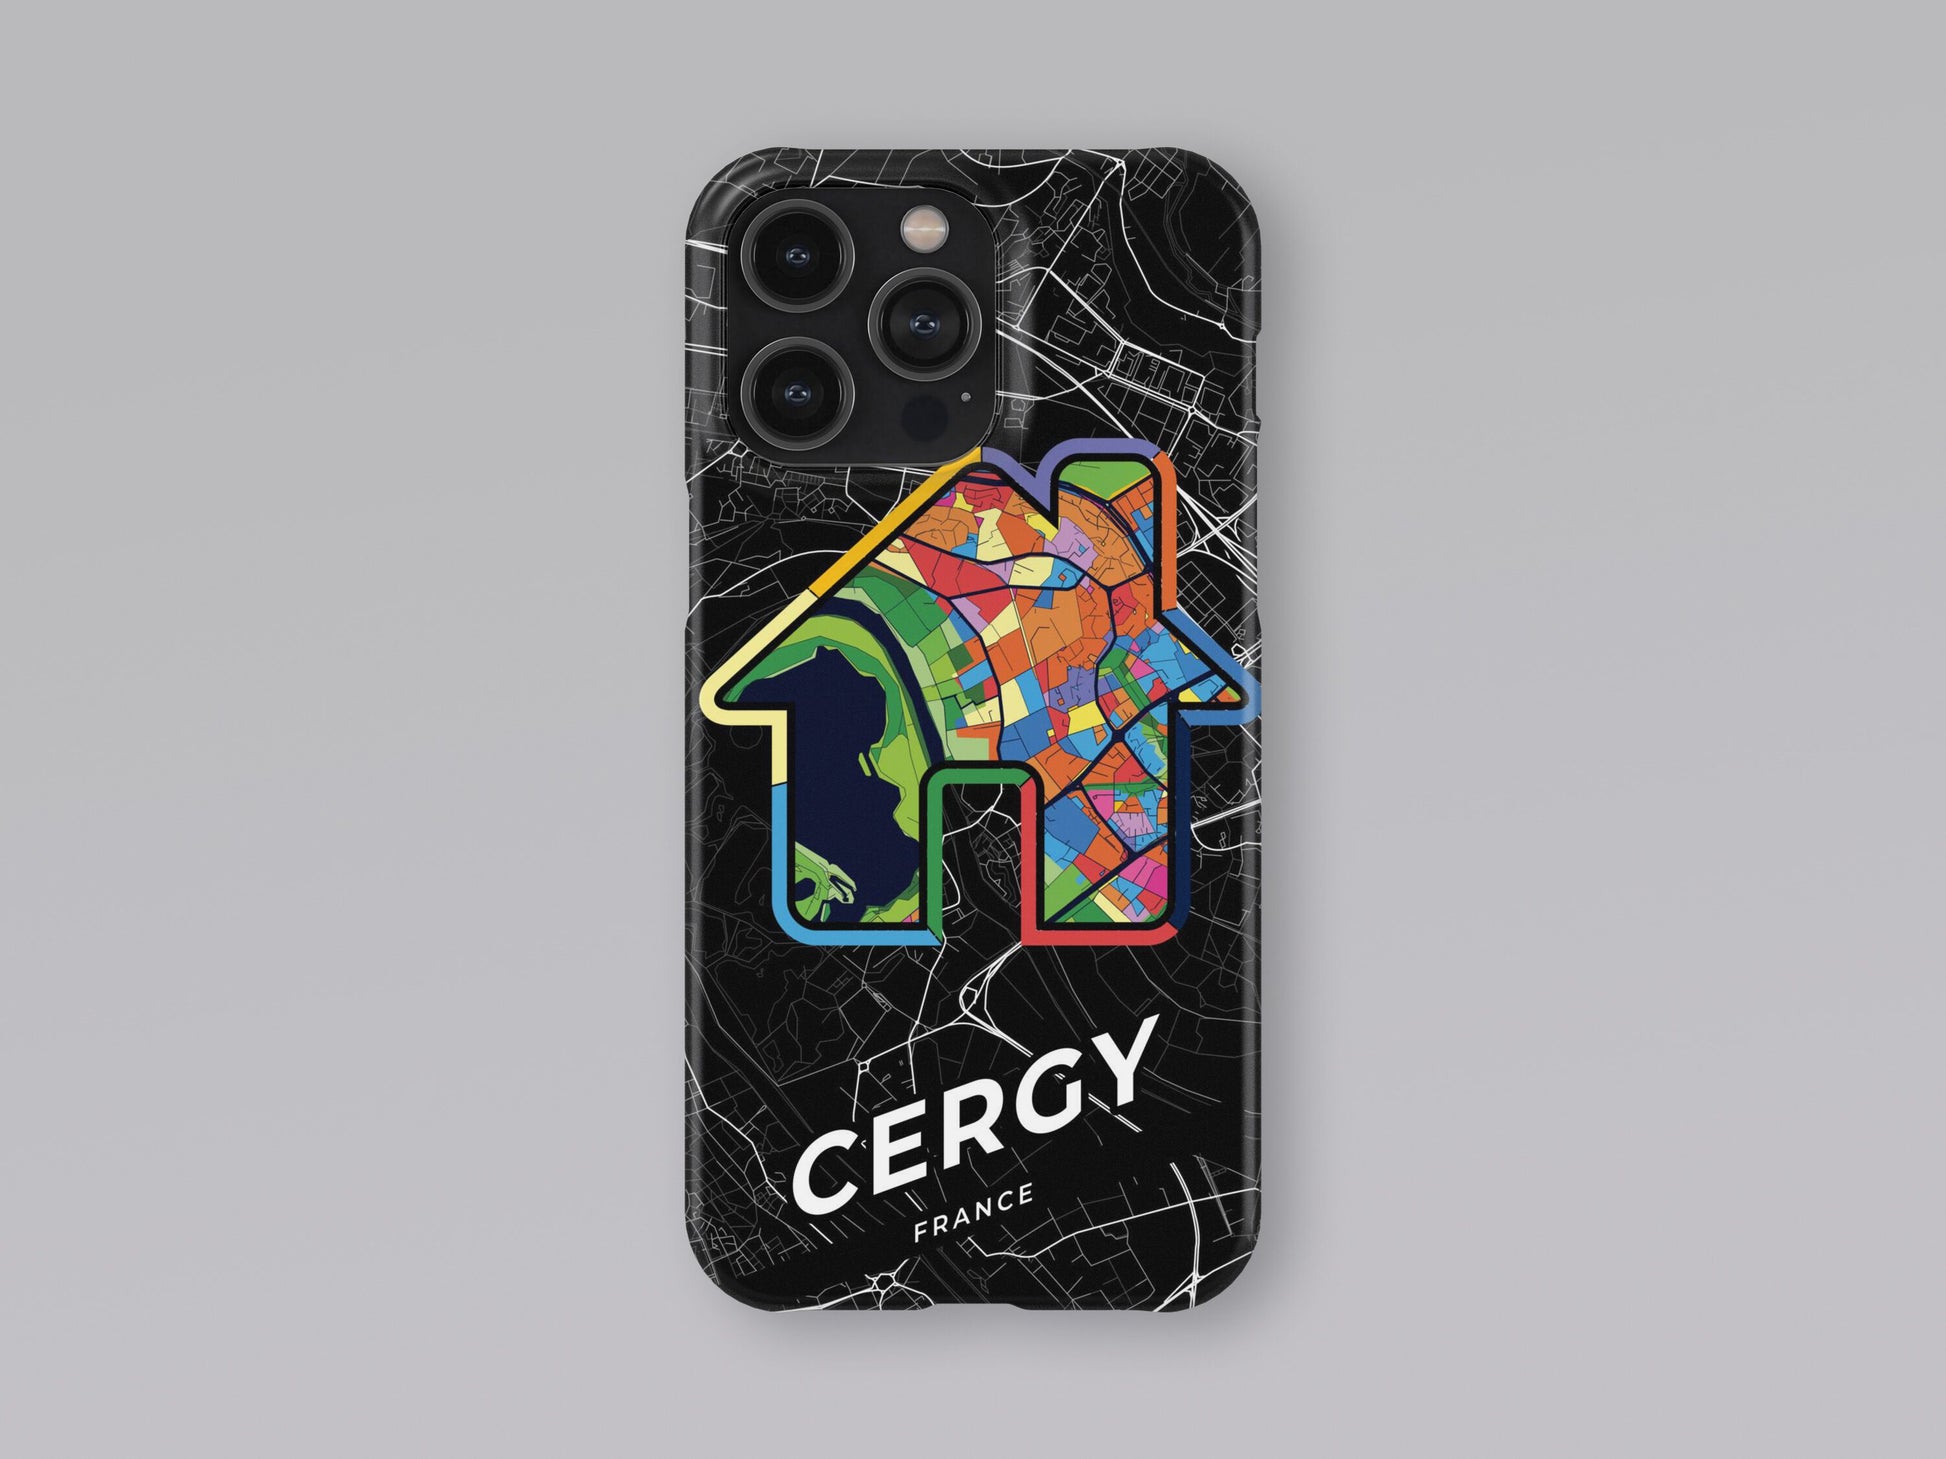 Cergy France slim phone case with colorful icon. Birthday, wedding or housewarming gift. Couple match cases. 3